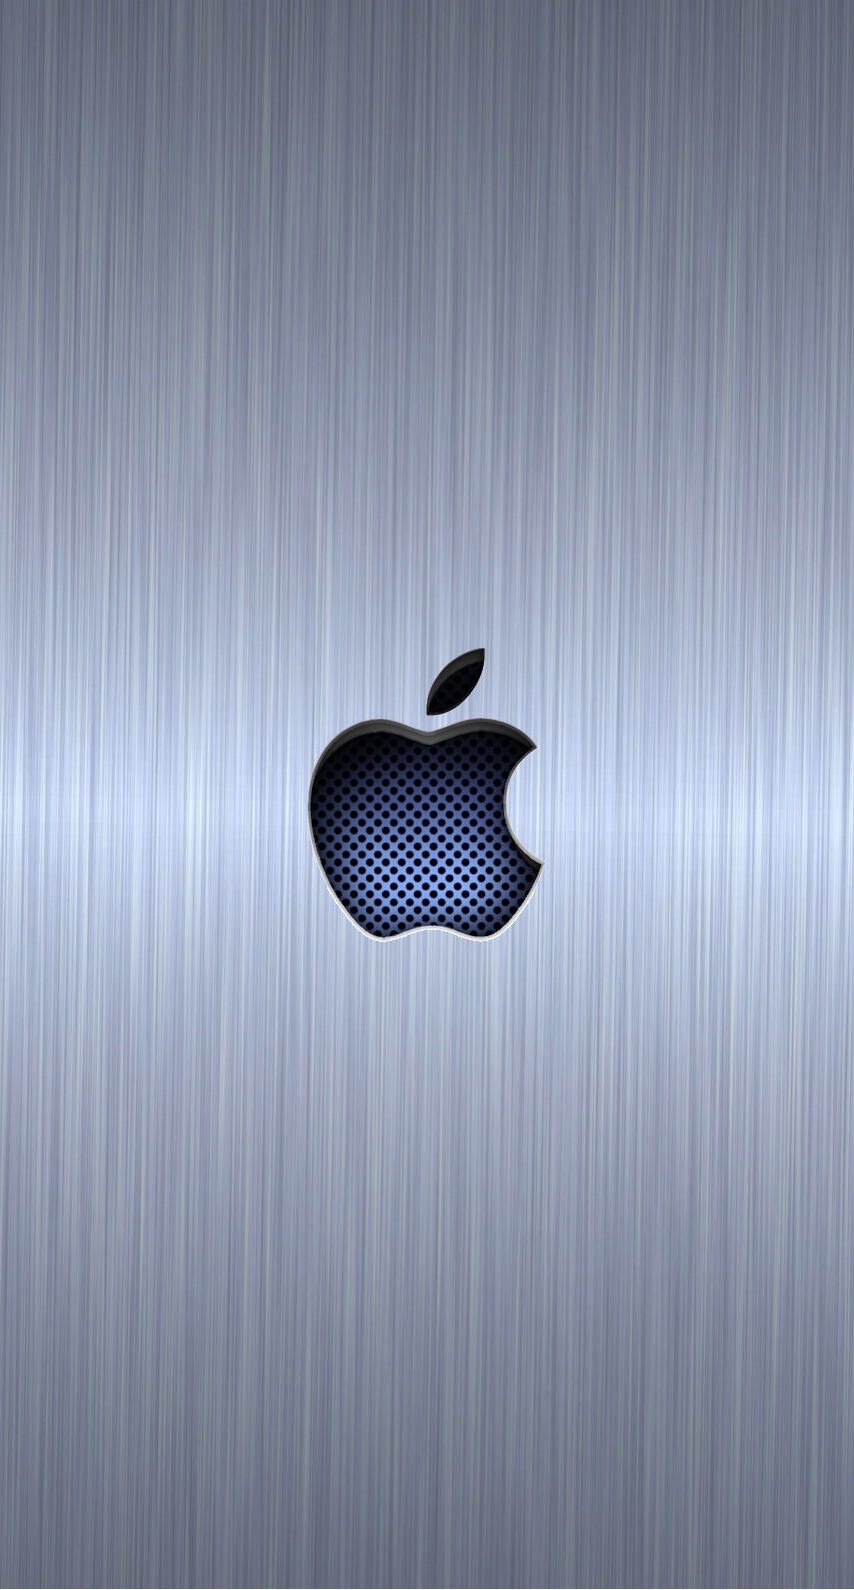 Silver Apple Cool Wallpaper Sc Iphone7